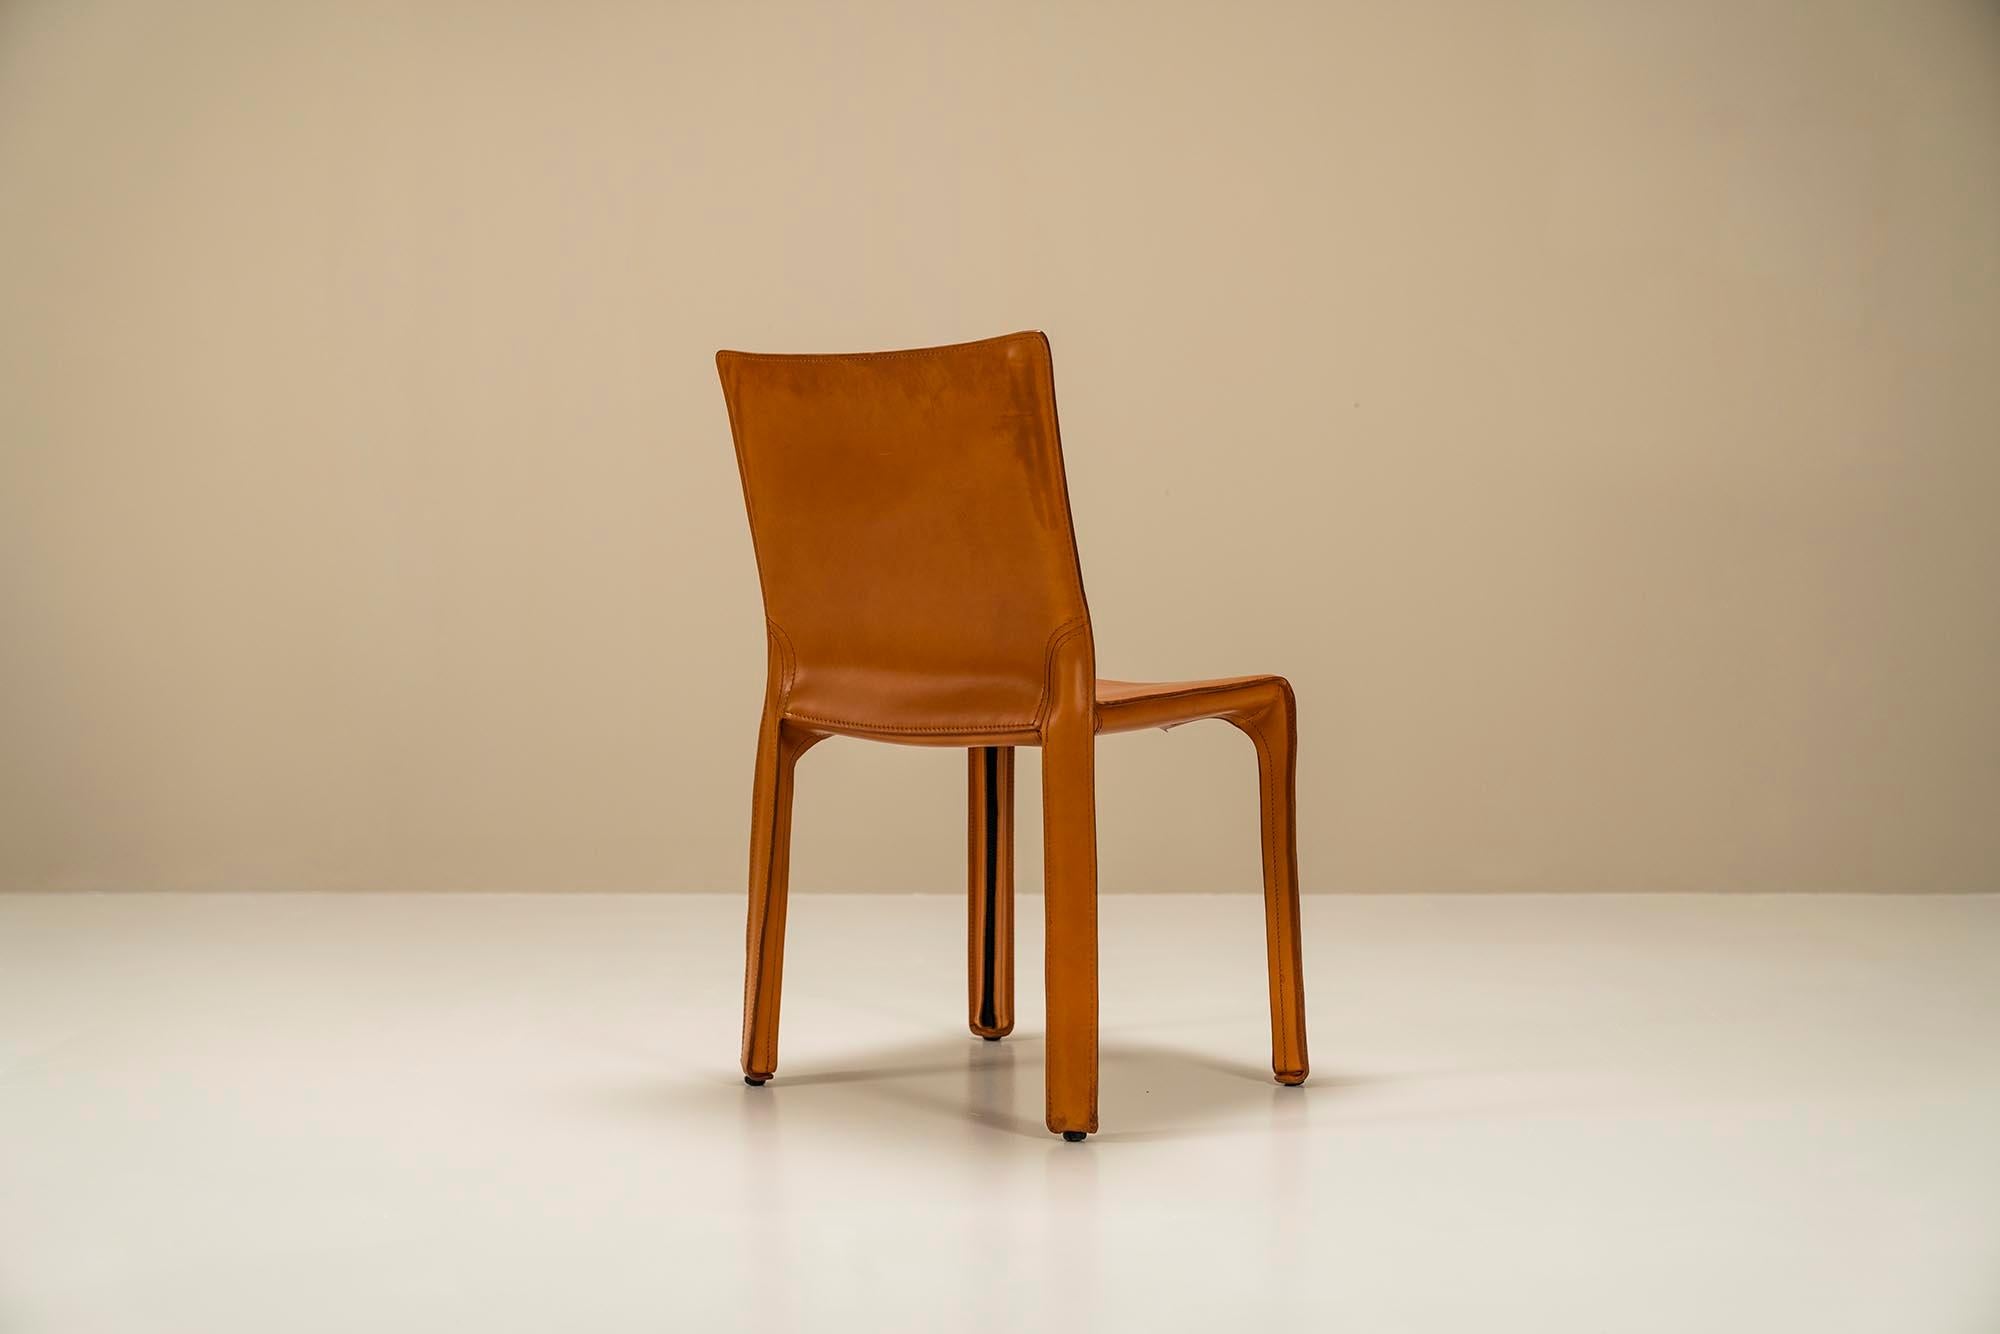 Late 20th Century Set of 4 'CAB' Chairs in Cognac Leather by Mario Bellini for Cassina, Italy 1977